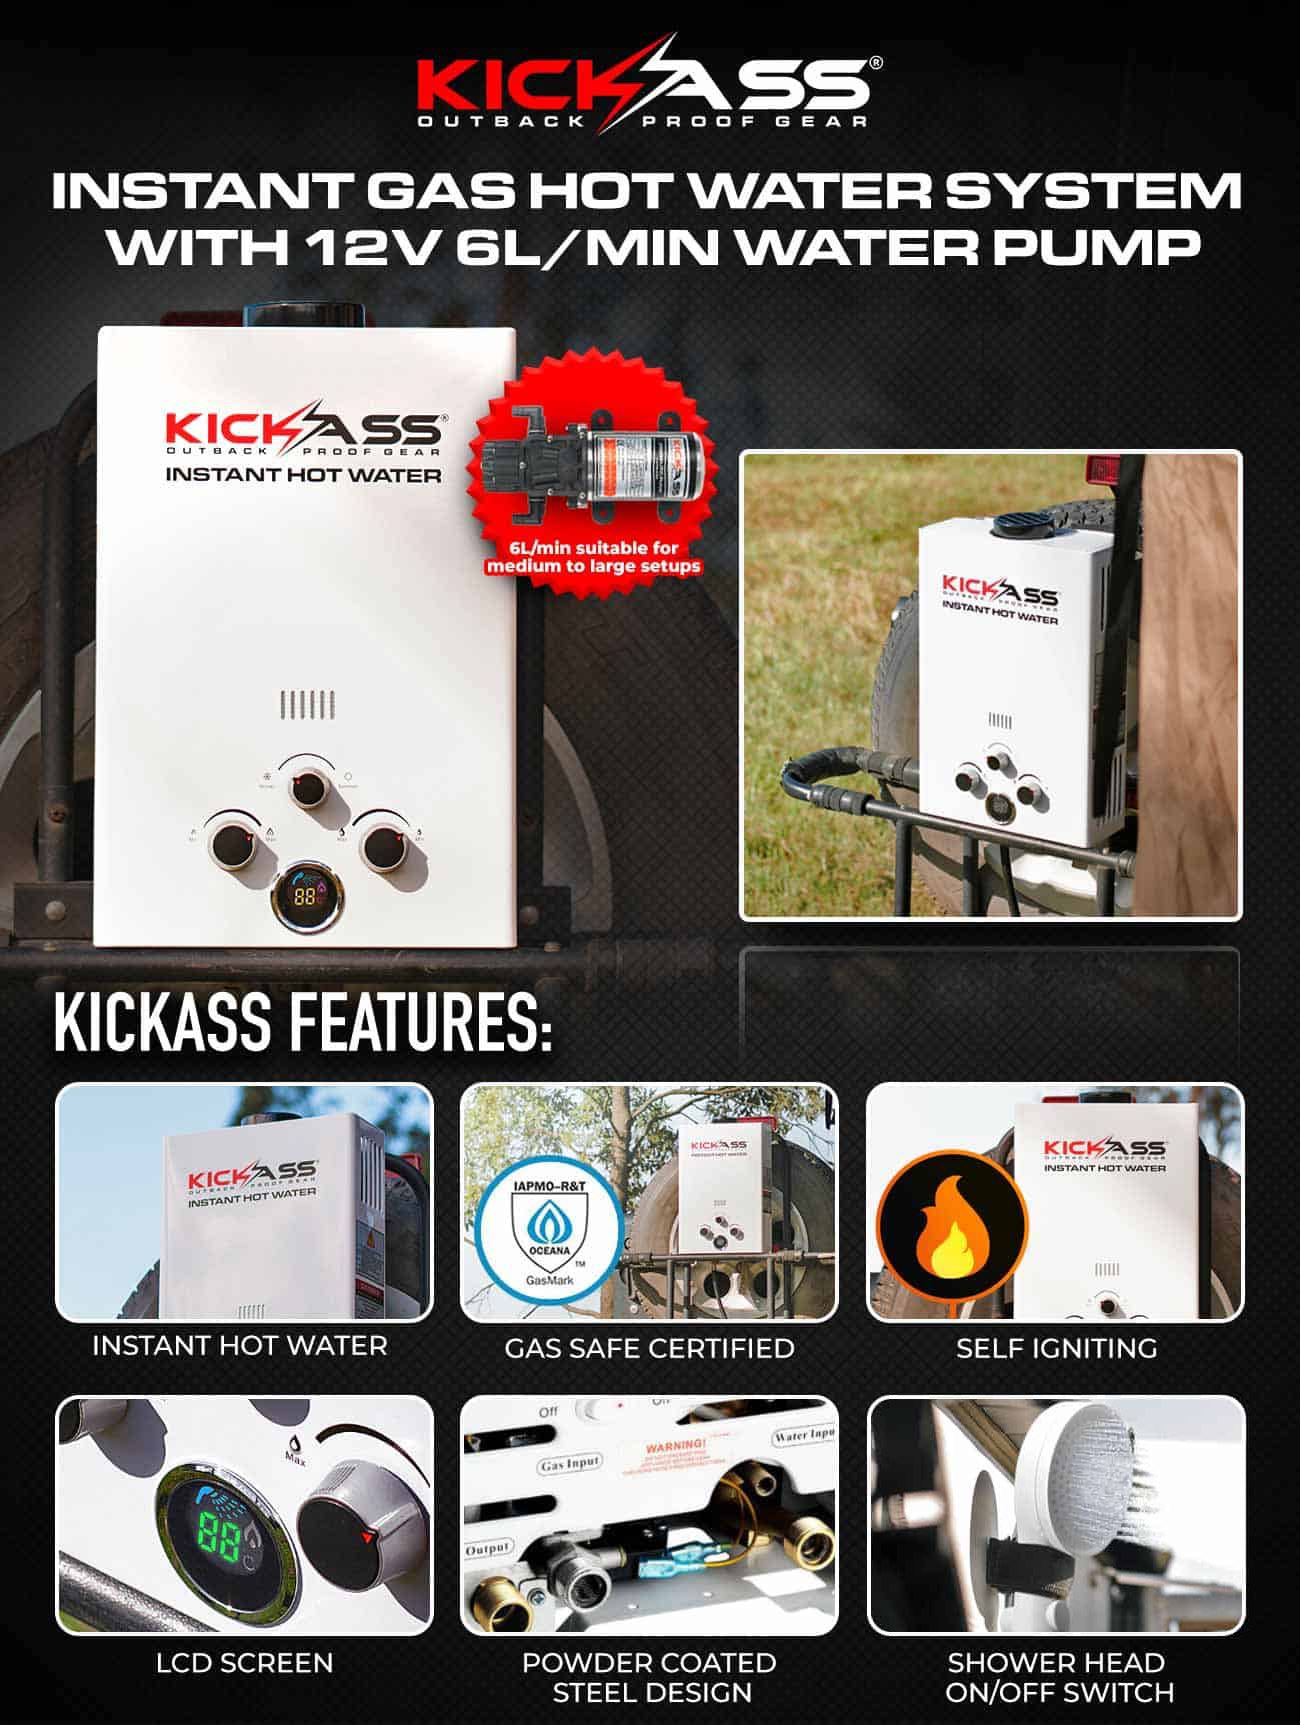 KAHWSGAS8_6 - KICKASS Instant Gas Hot Water System with 12V 6L/min Water Pump